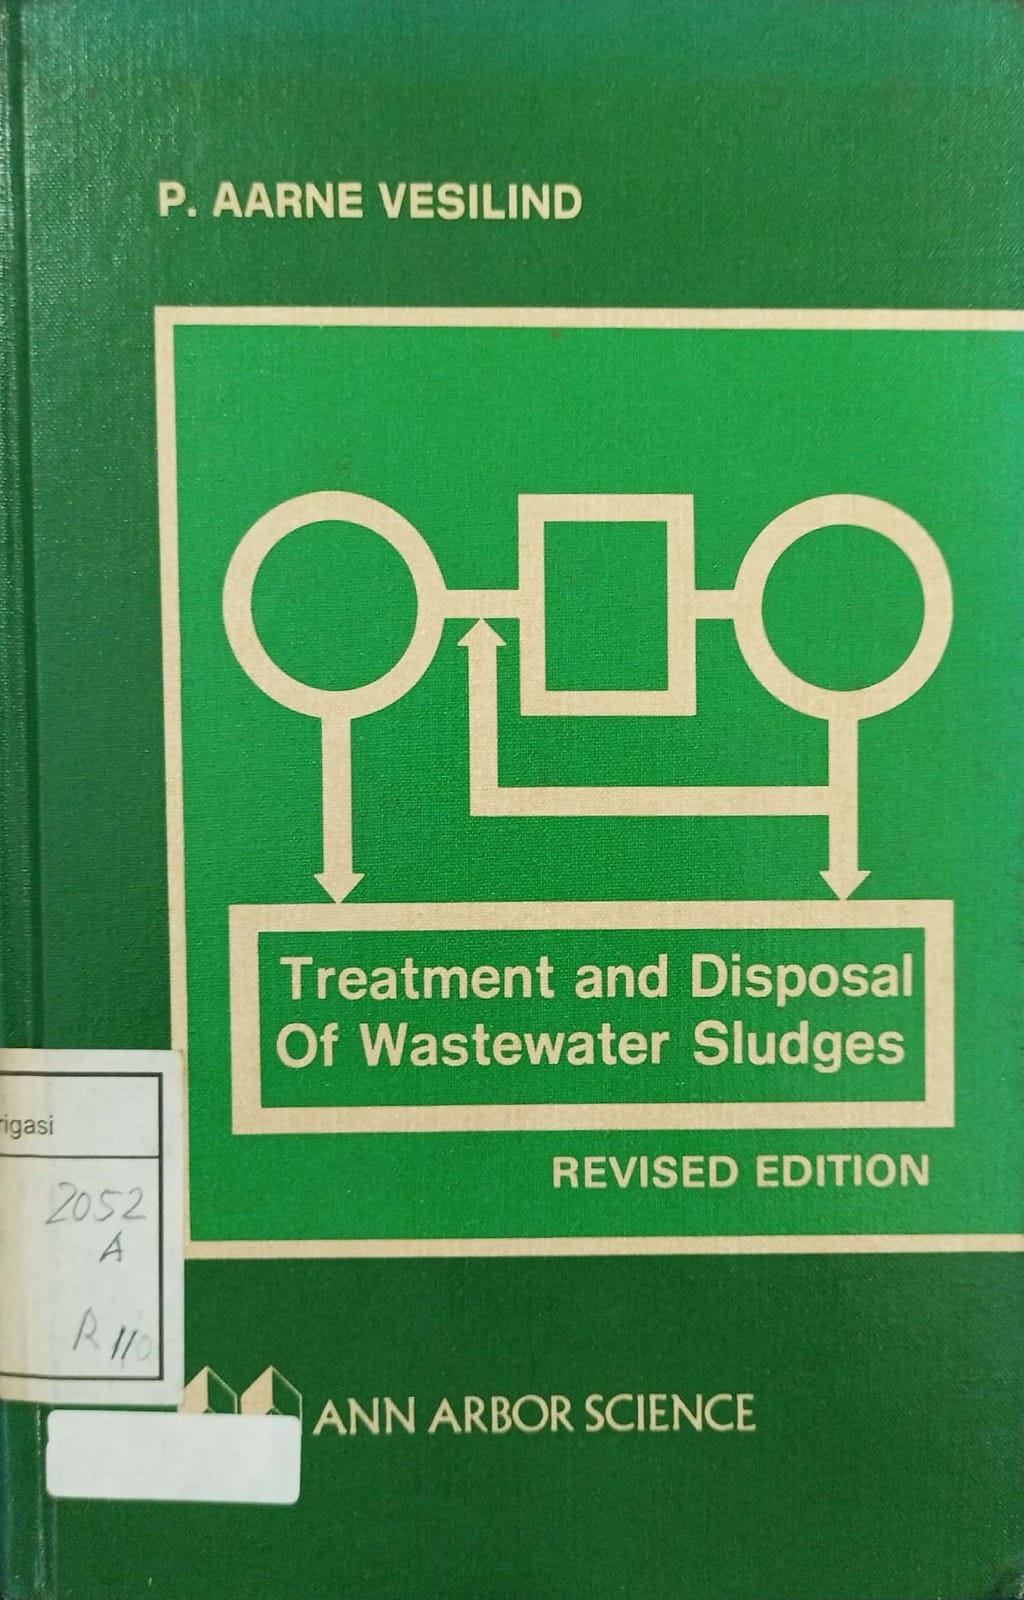 Treatment and Disposal Of Wastewater Sludges